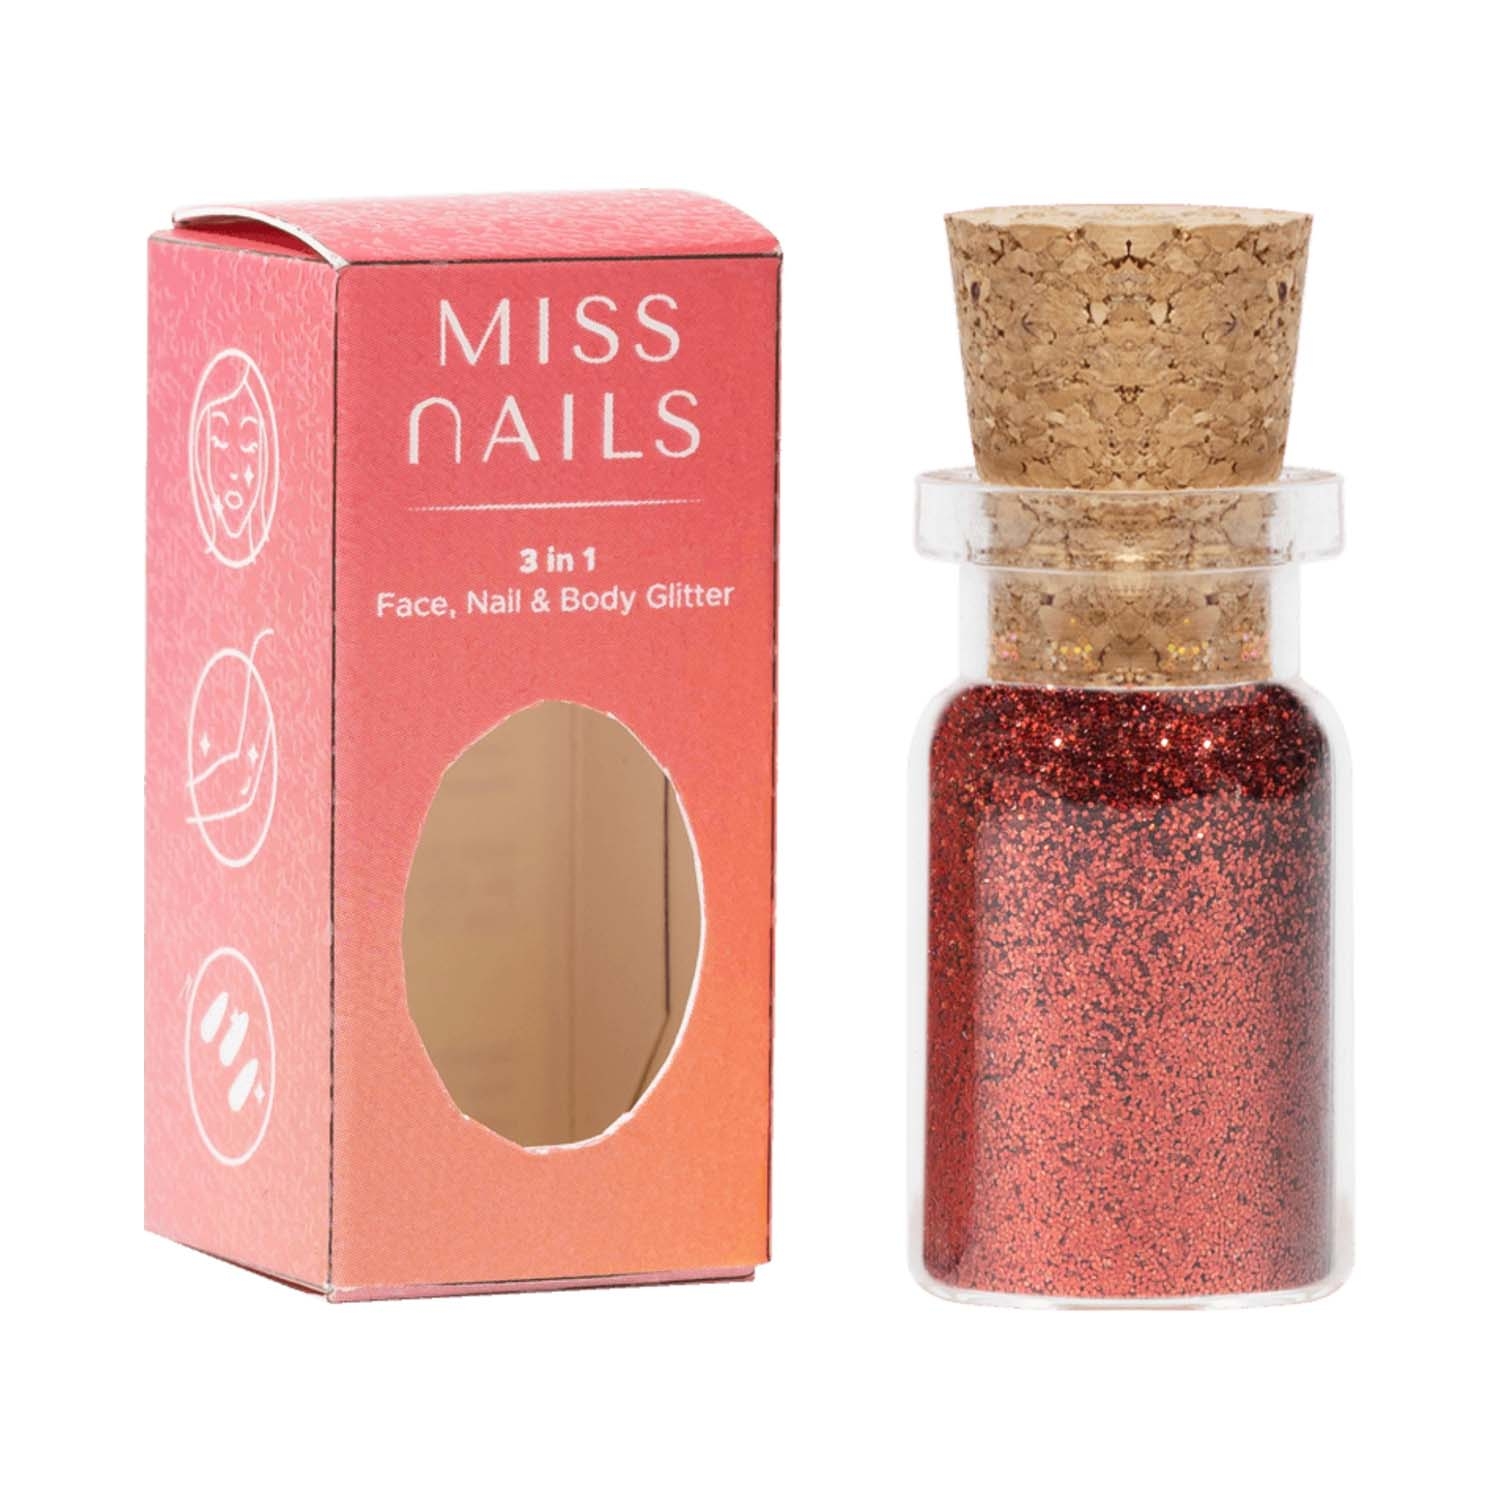 Miss Nails | Miss Nails 3 In 1 Glitter Nail Polish - 7 Red Forever (5g)